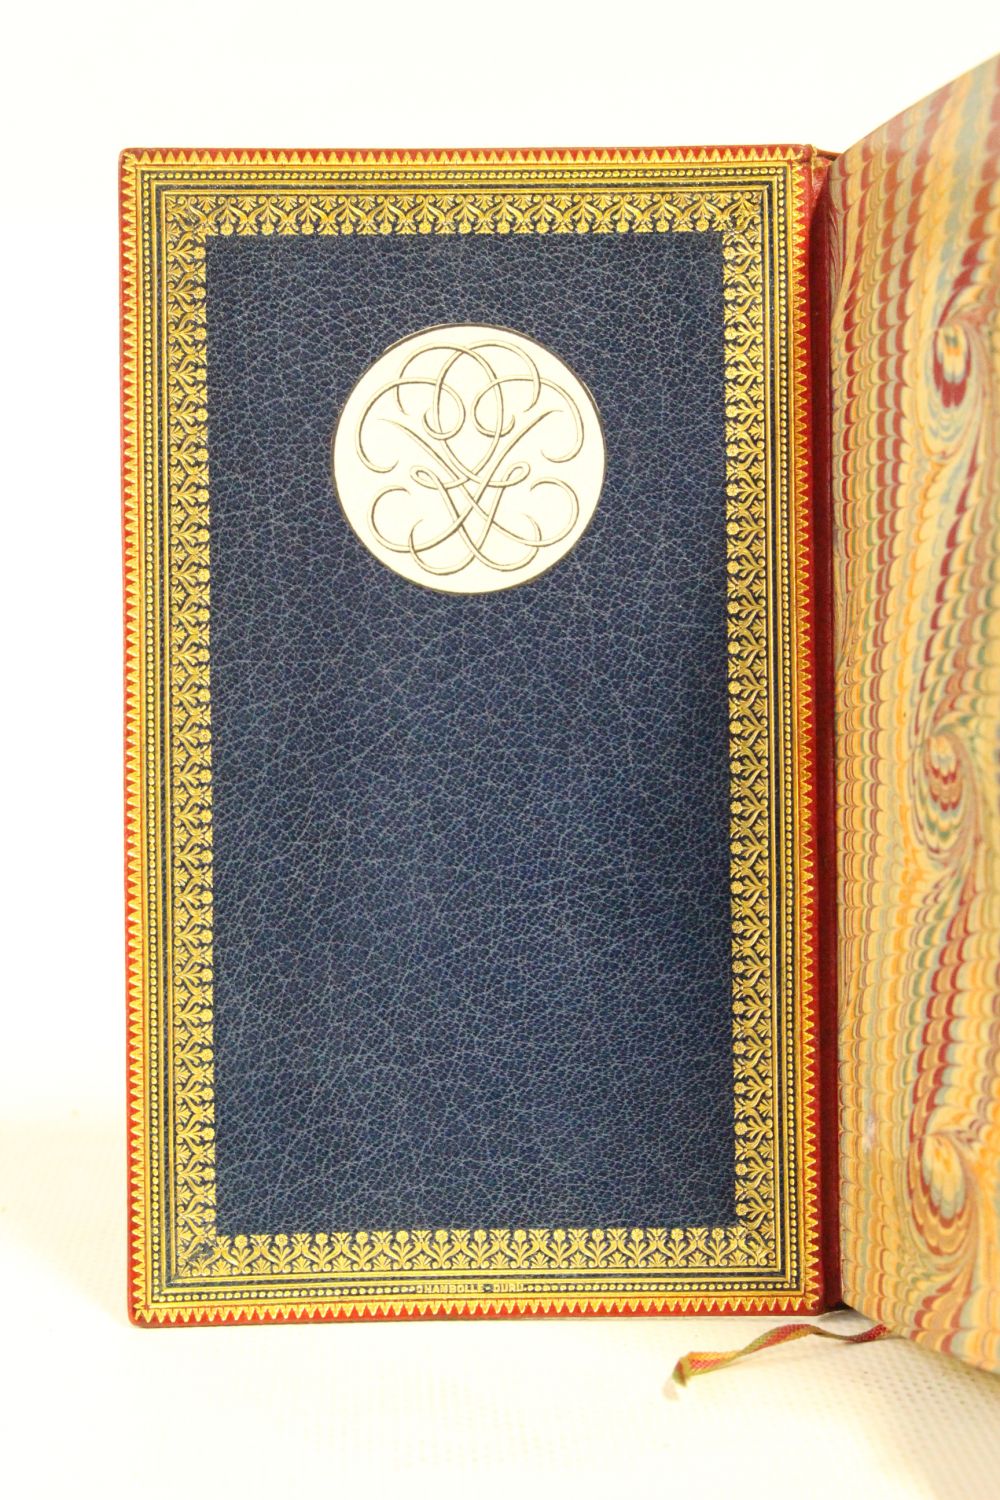 Sold at Auction: PUB. 1847, FIRST EDITION, SIECLE DE LOUIS XIV BY VOLTAIRE,  HARDCOVER BOOK.